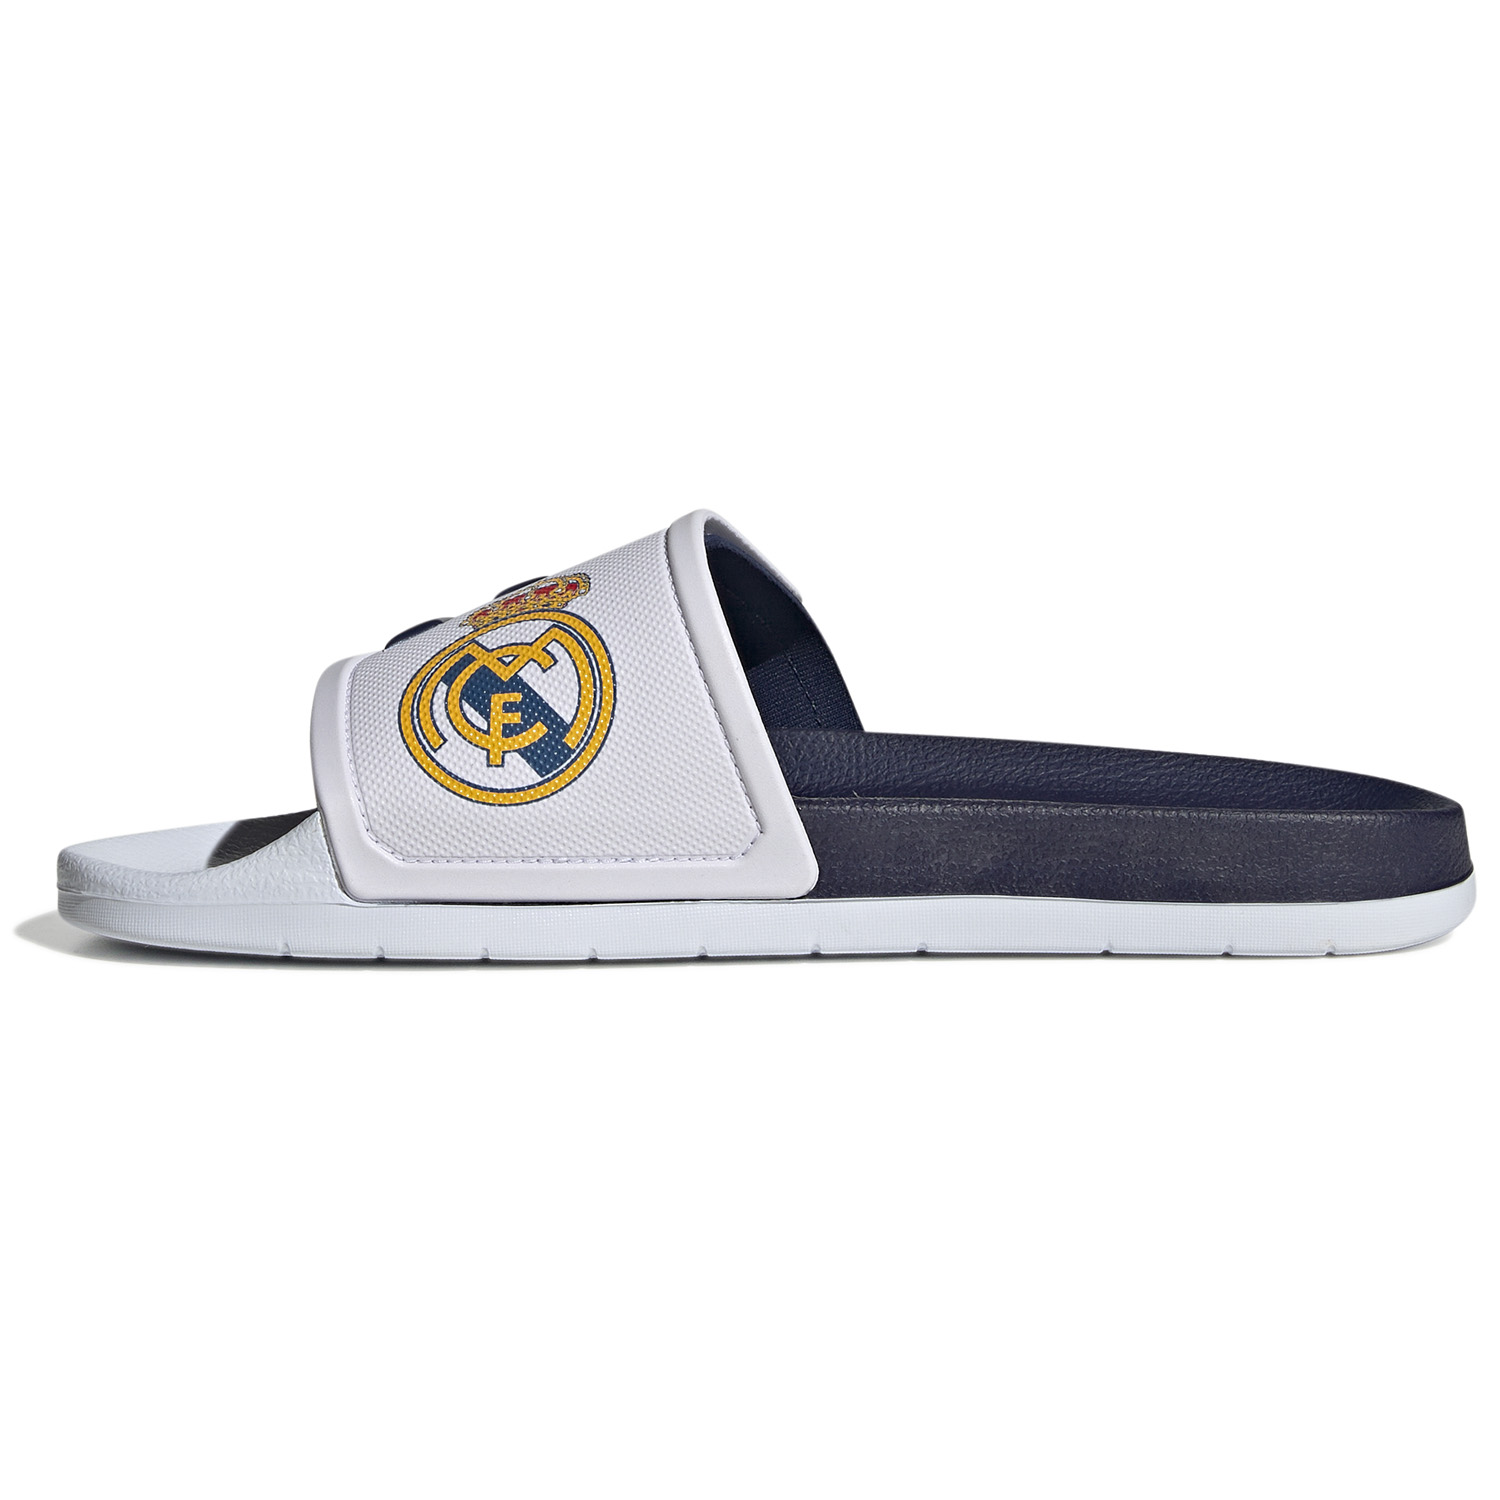 Update more than 264 adidas real madrid slippers best